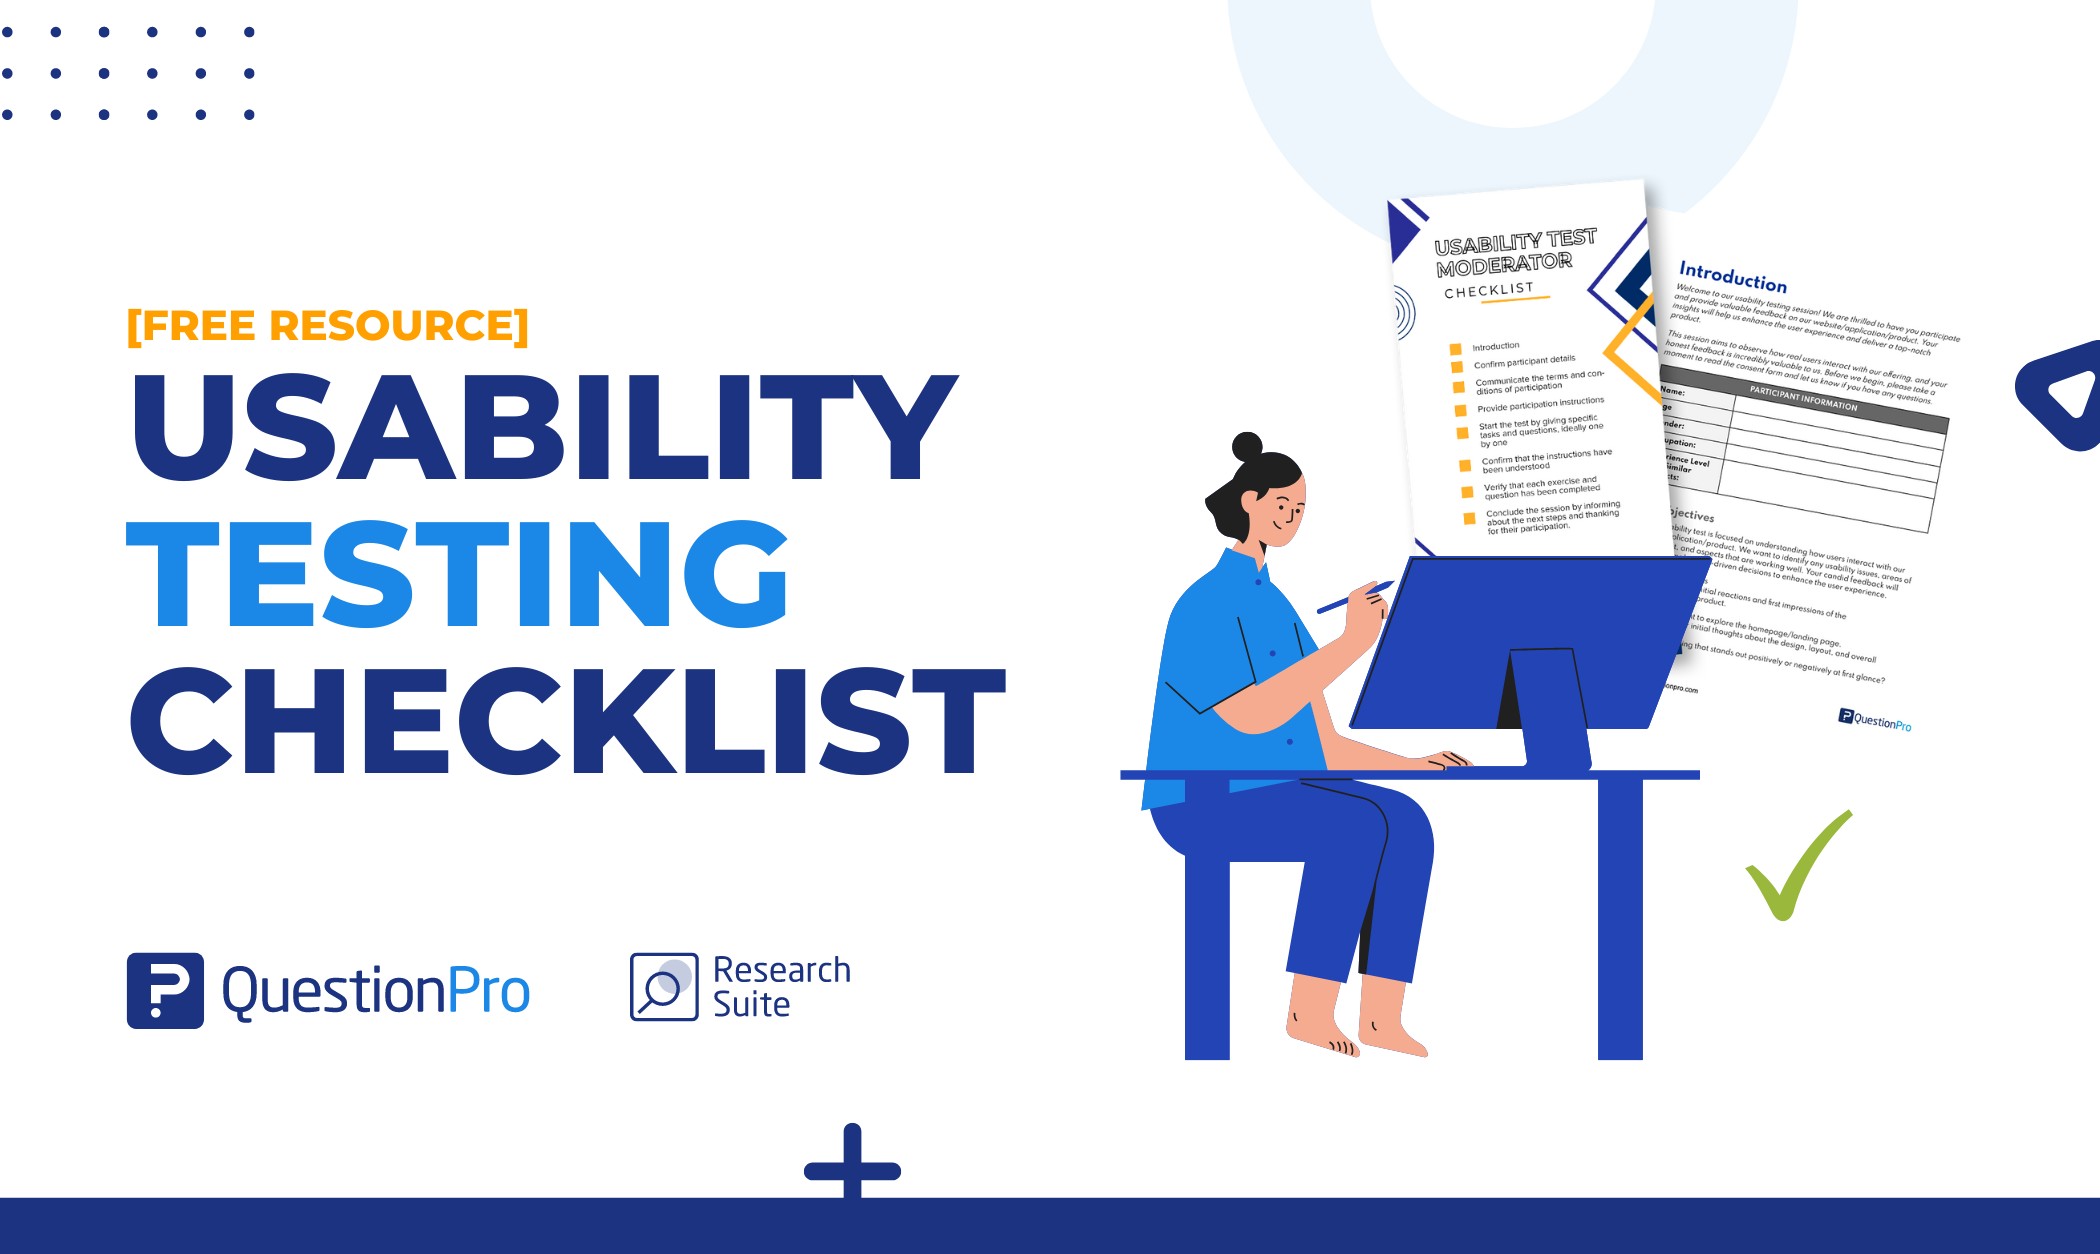 We gather the most important steps in this Usability Testing Checklist. It's the perfect resource for your first test. Download for Free!